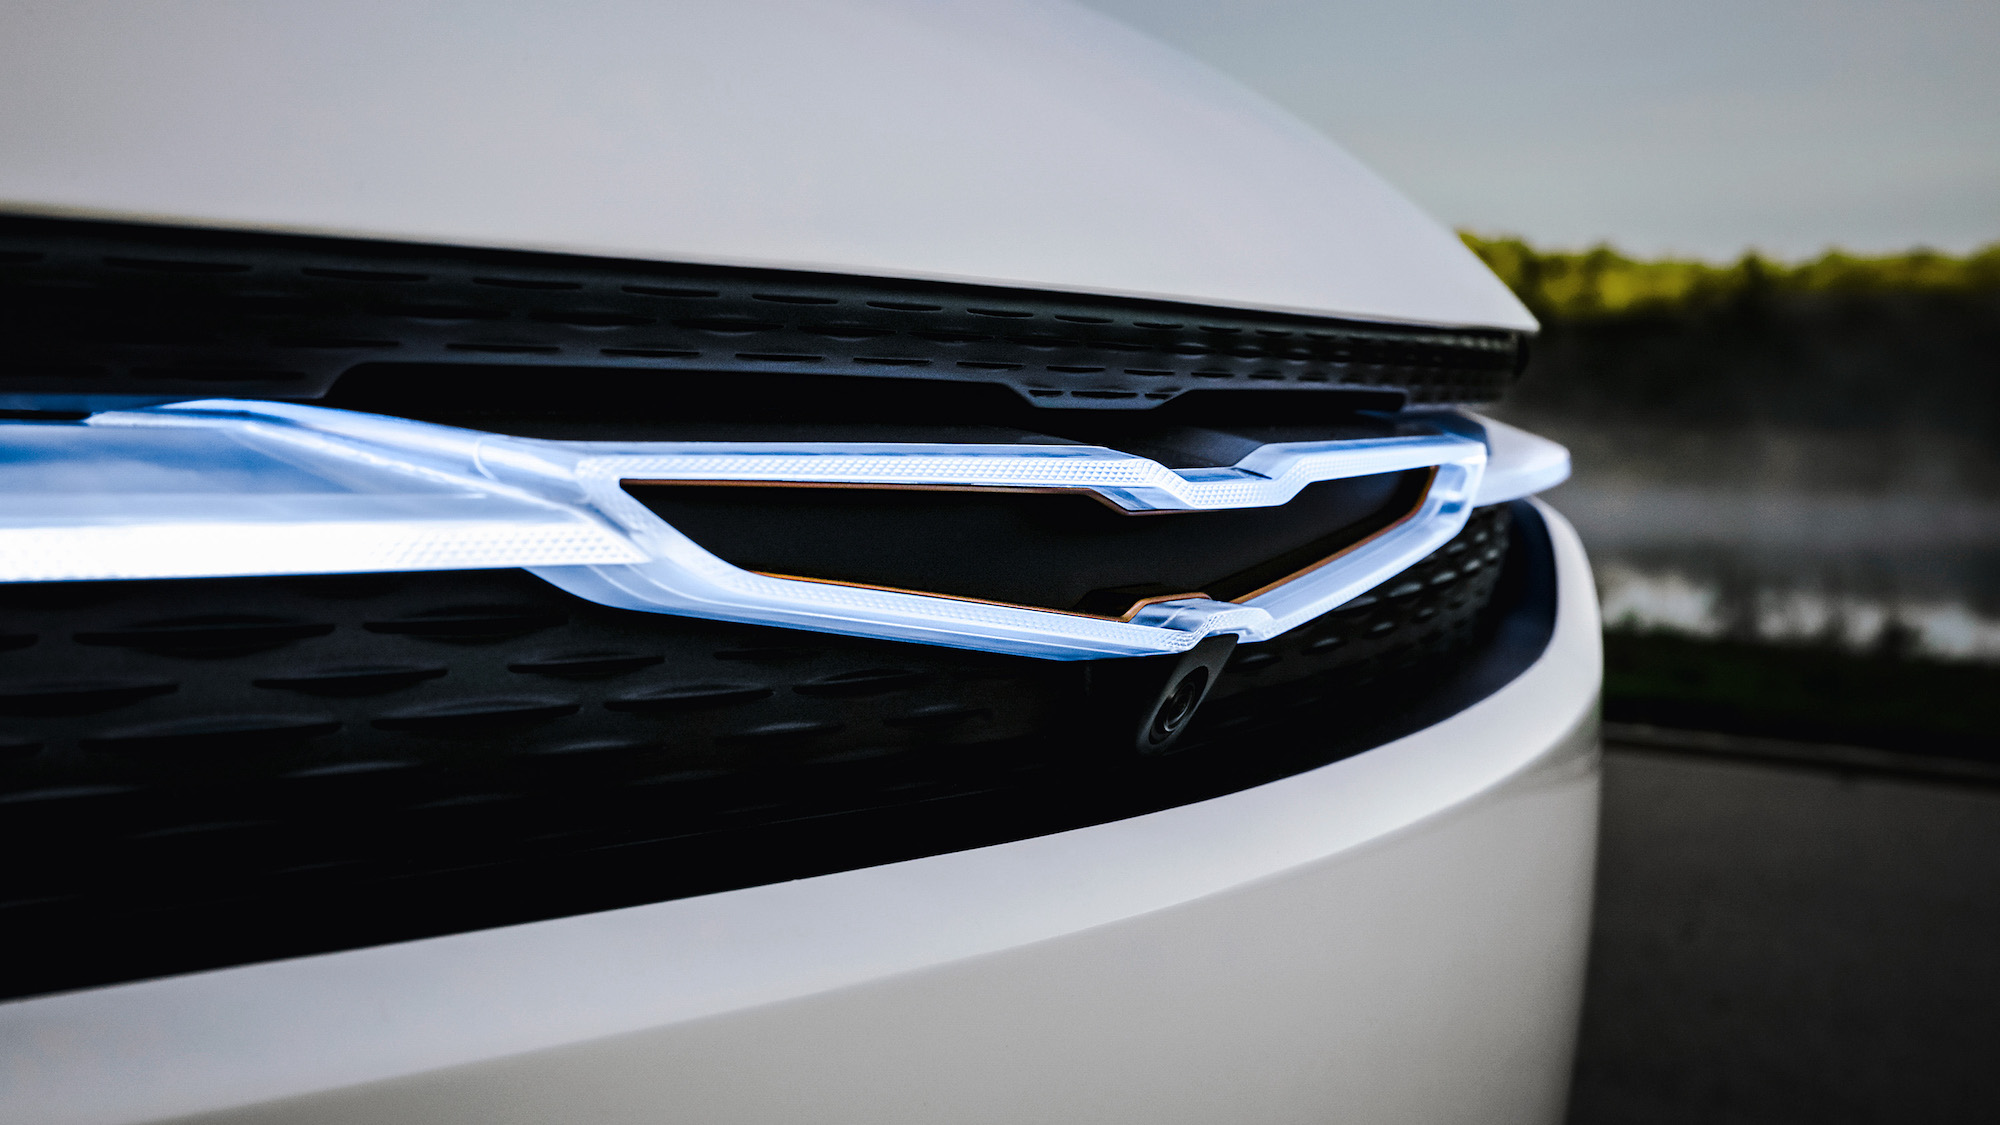 Chrysler Airflow Concept announces its electric aesthetic with the Chrysler Wing logo tied into a cross-car grille/light blade illuminated with crystal LED lighting.